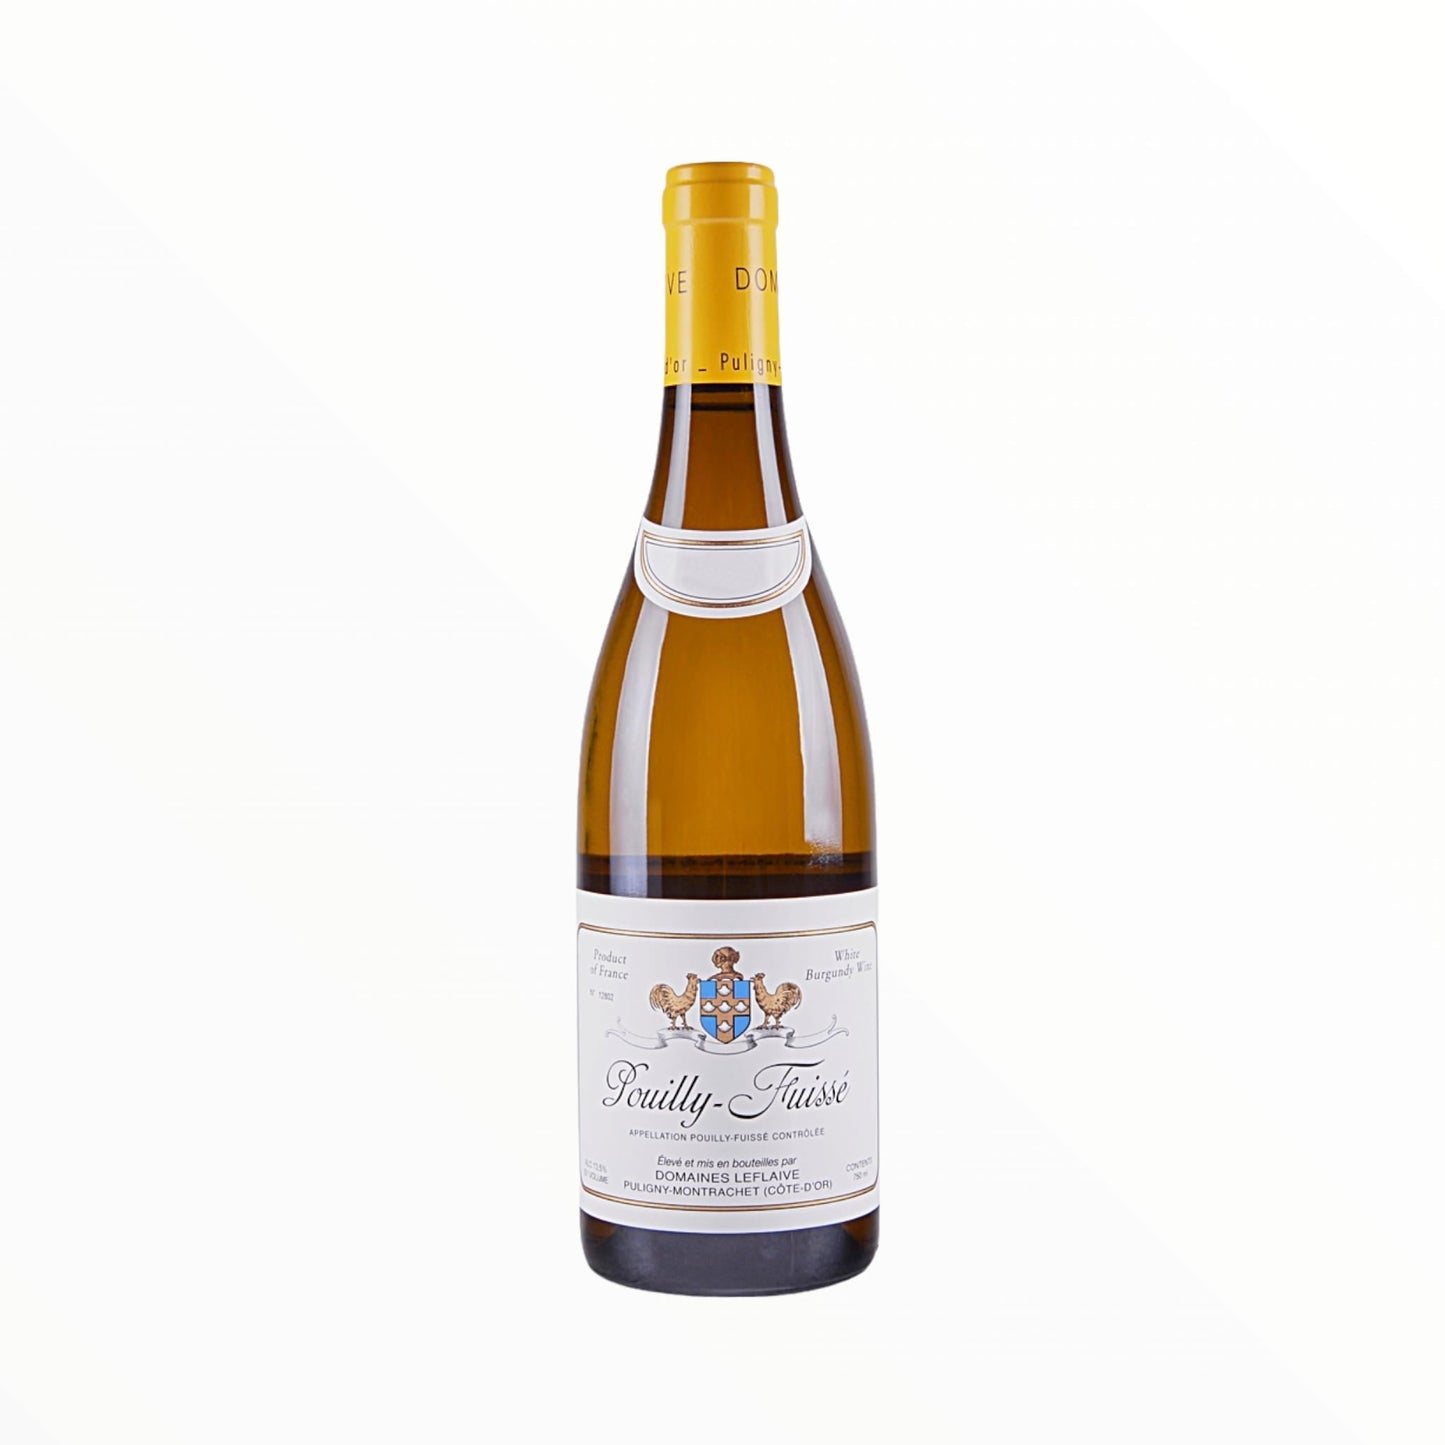 2015 Domaines Leflaive, Pouilly Fuisse 750ml